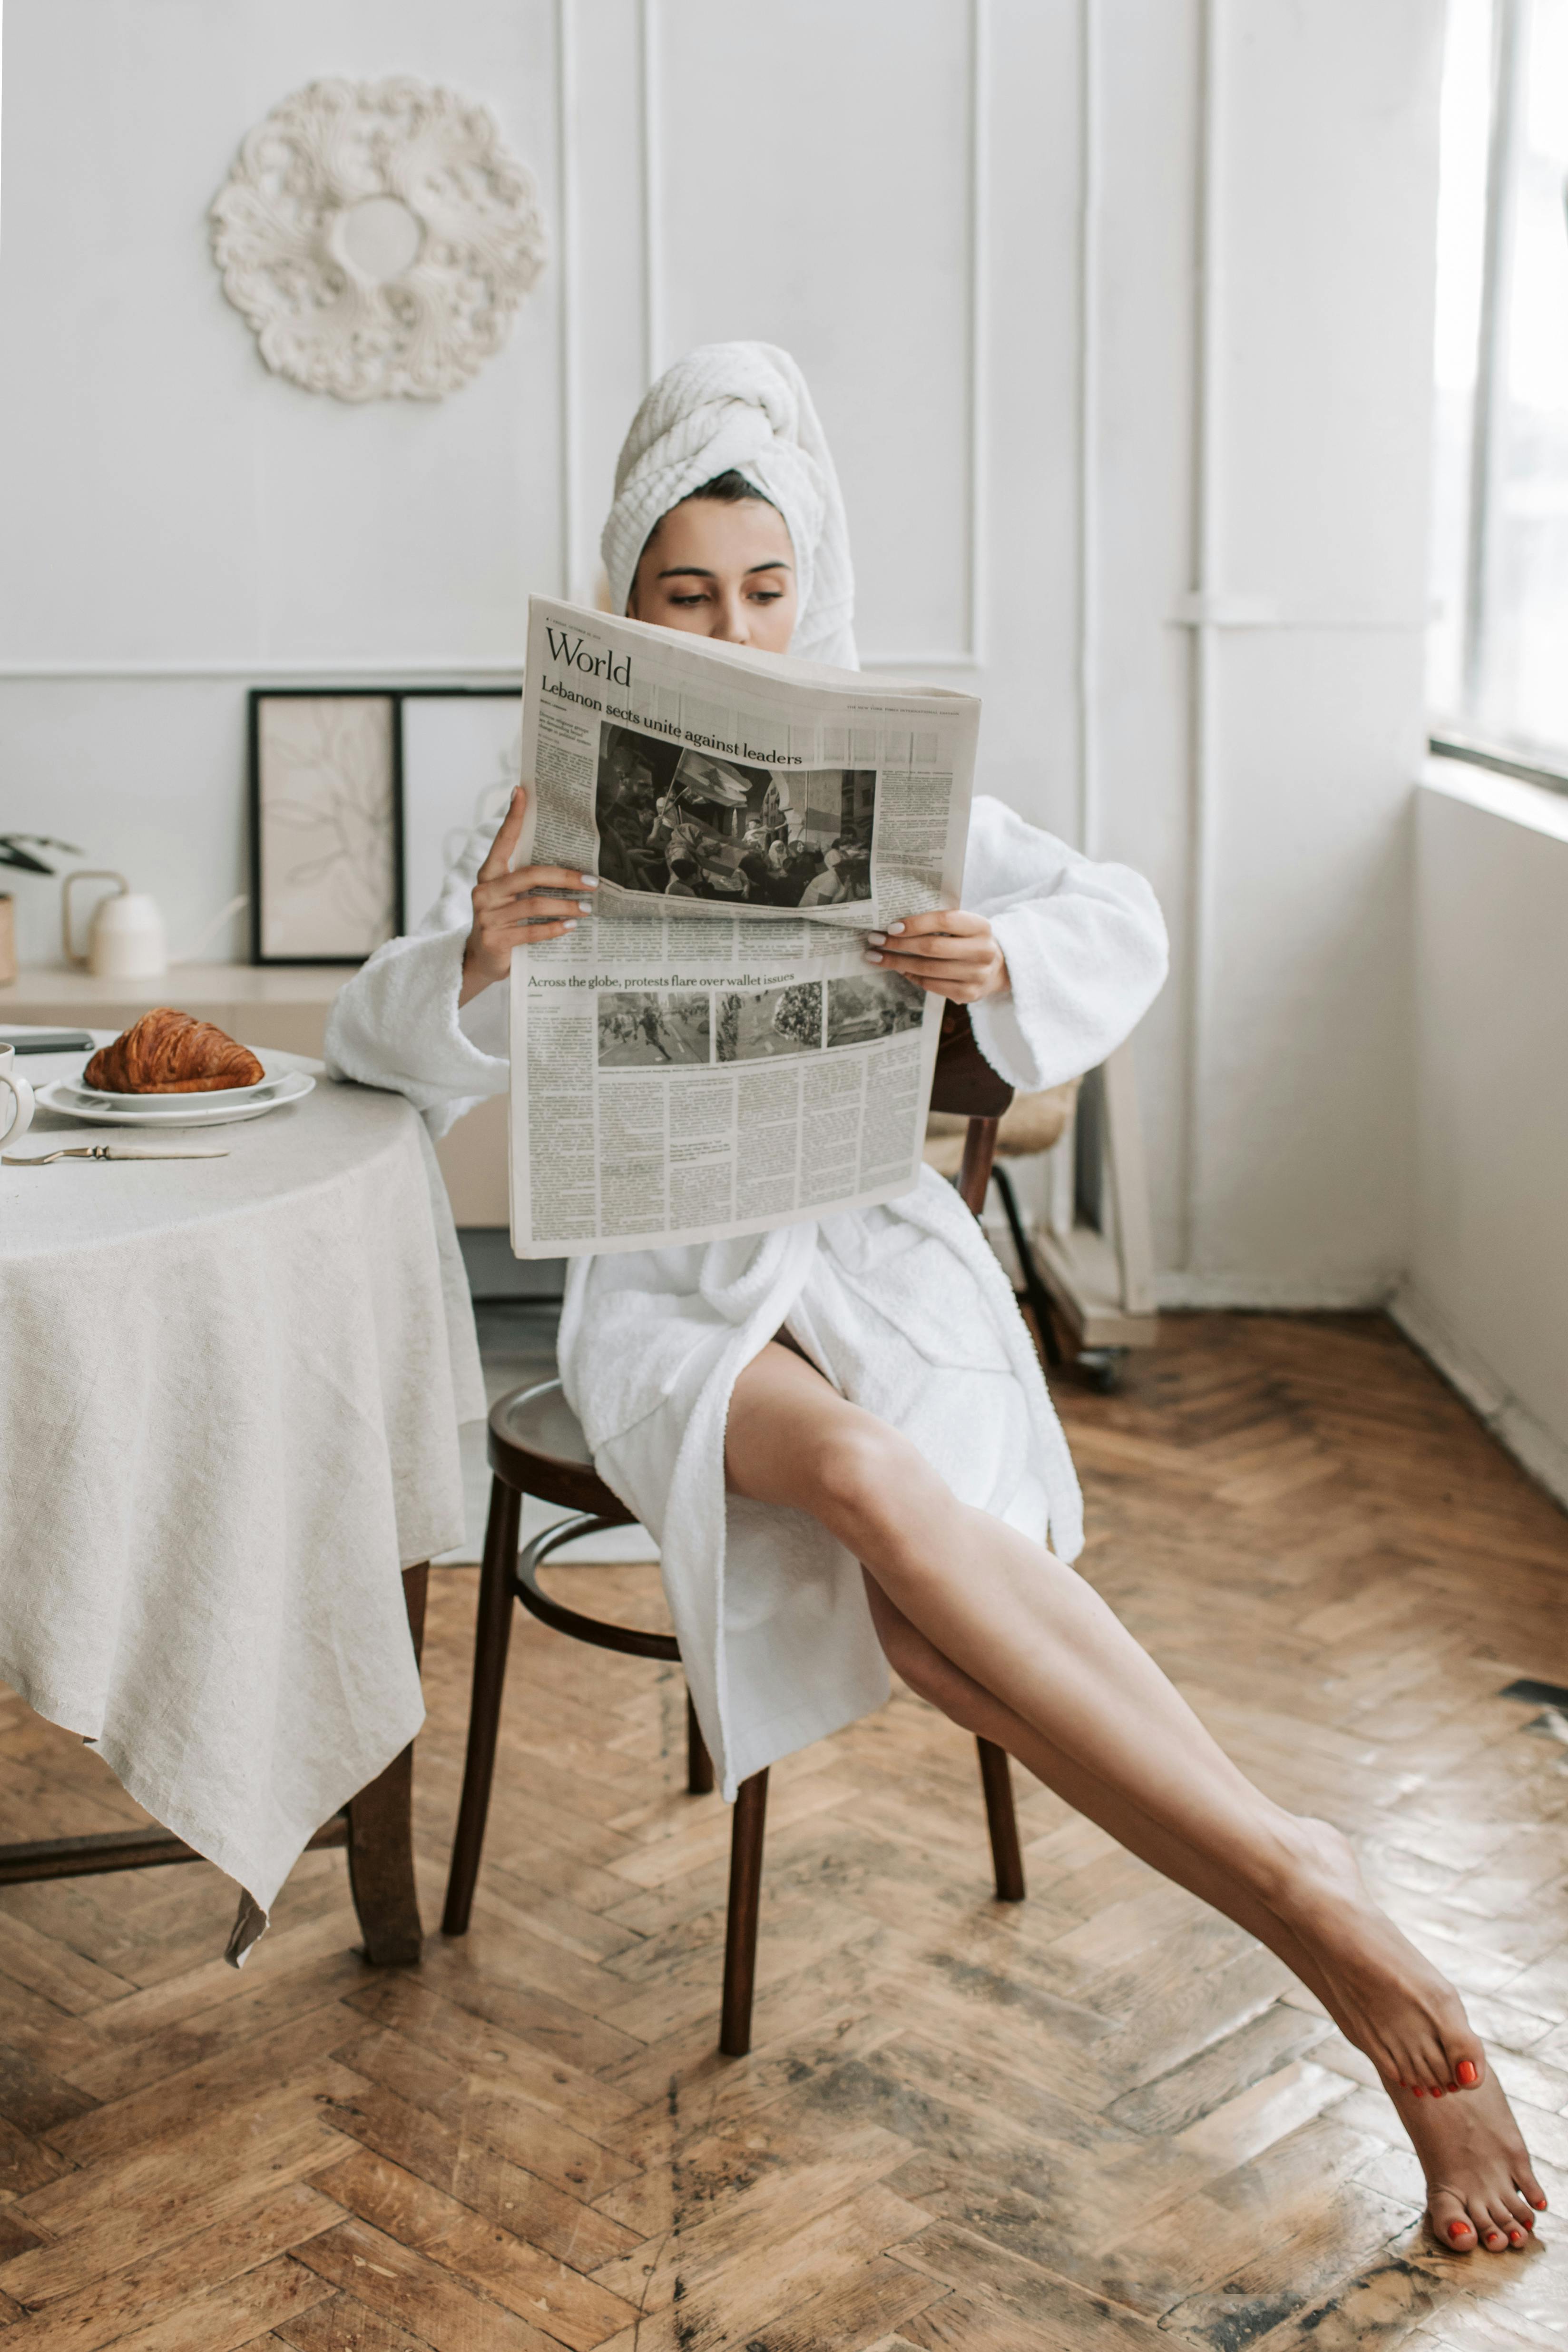 A woman reading a newspaper after showering | Source: Pexels